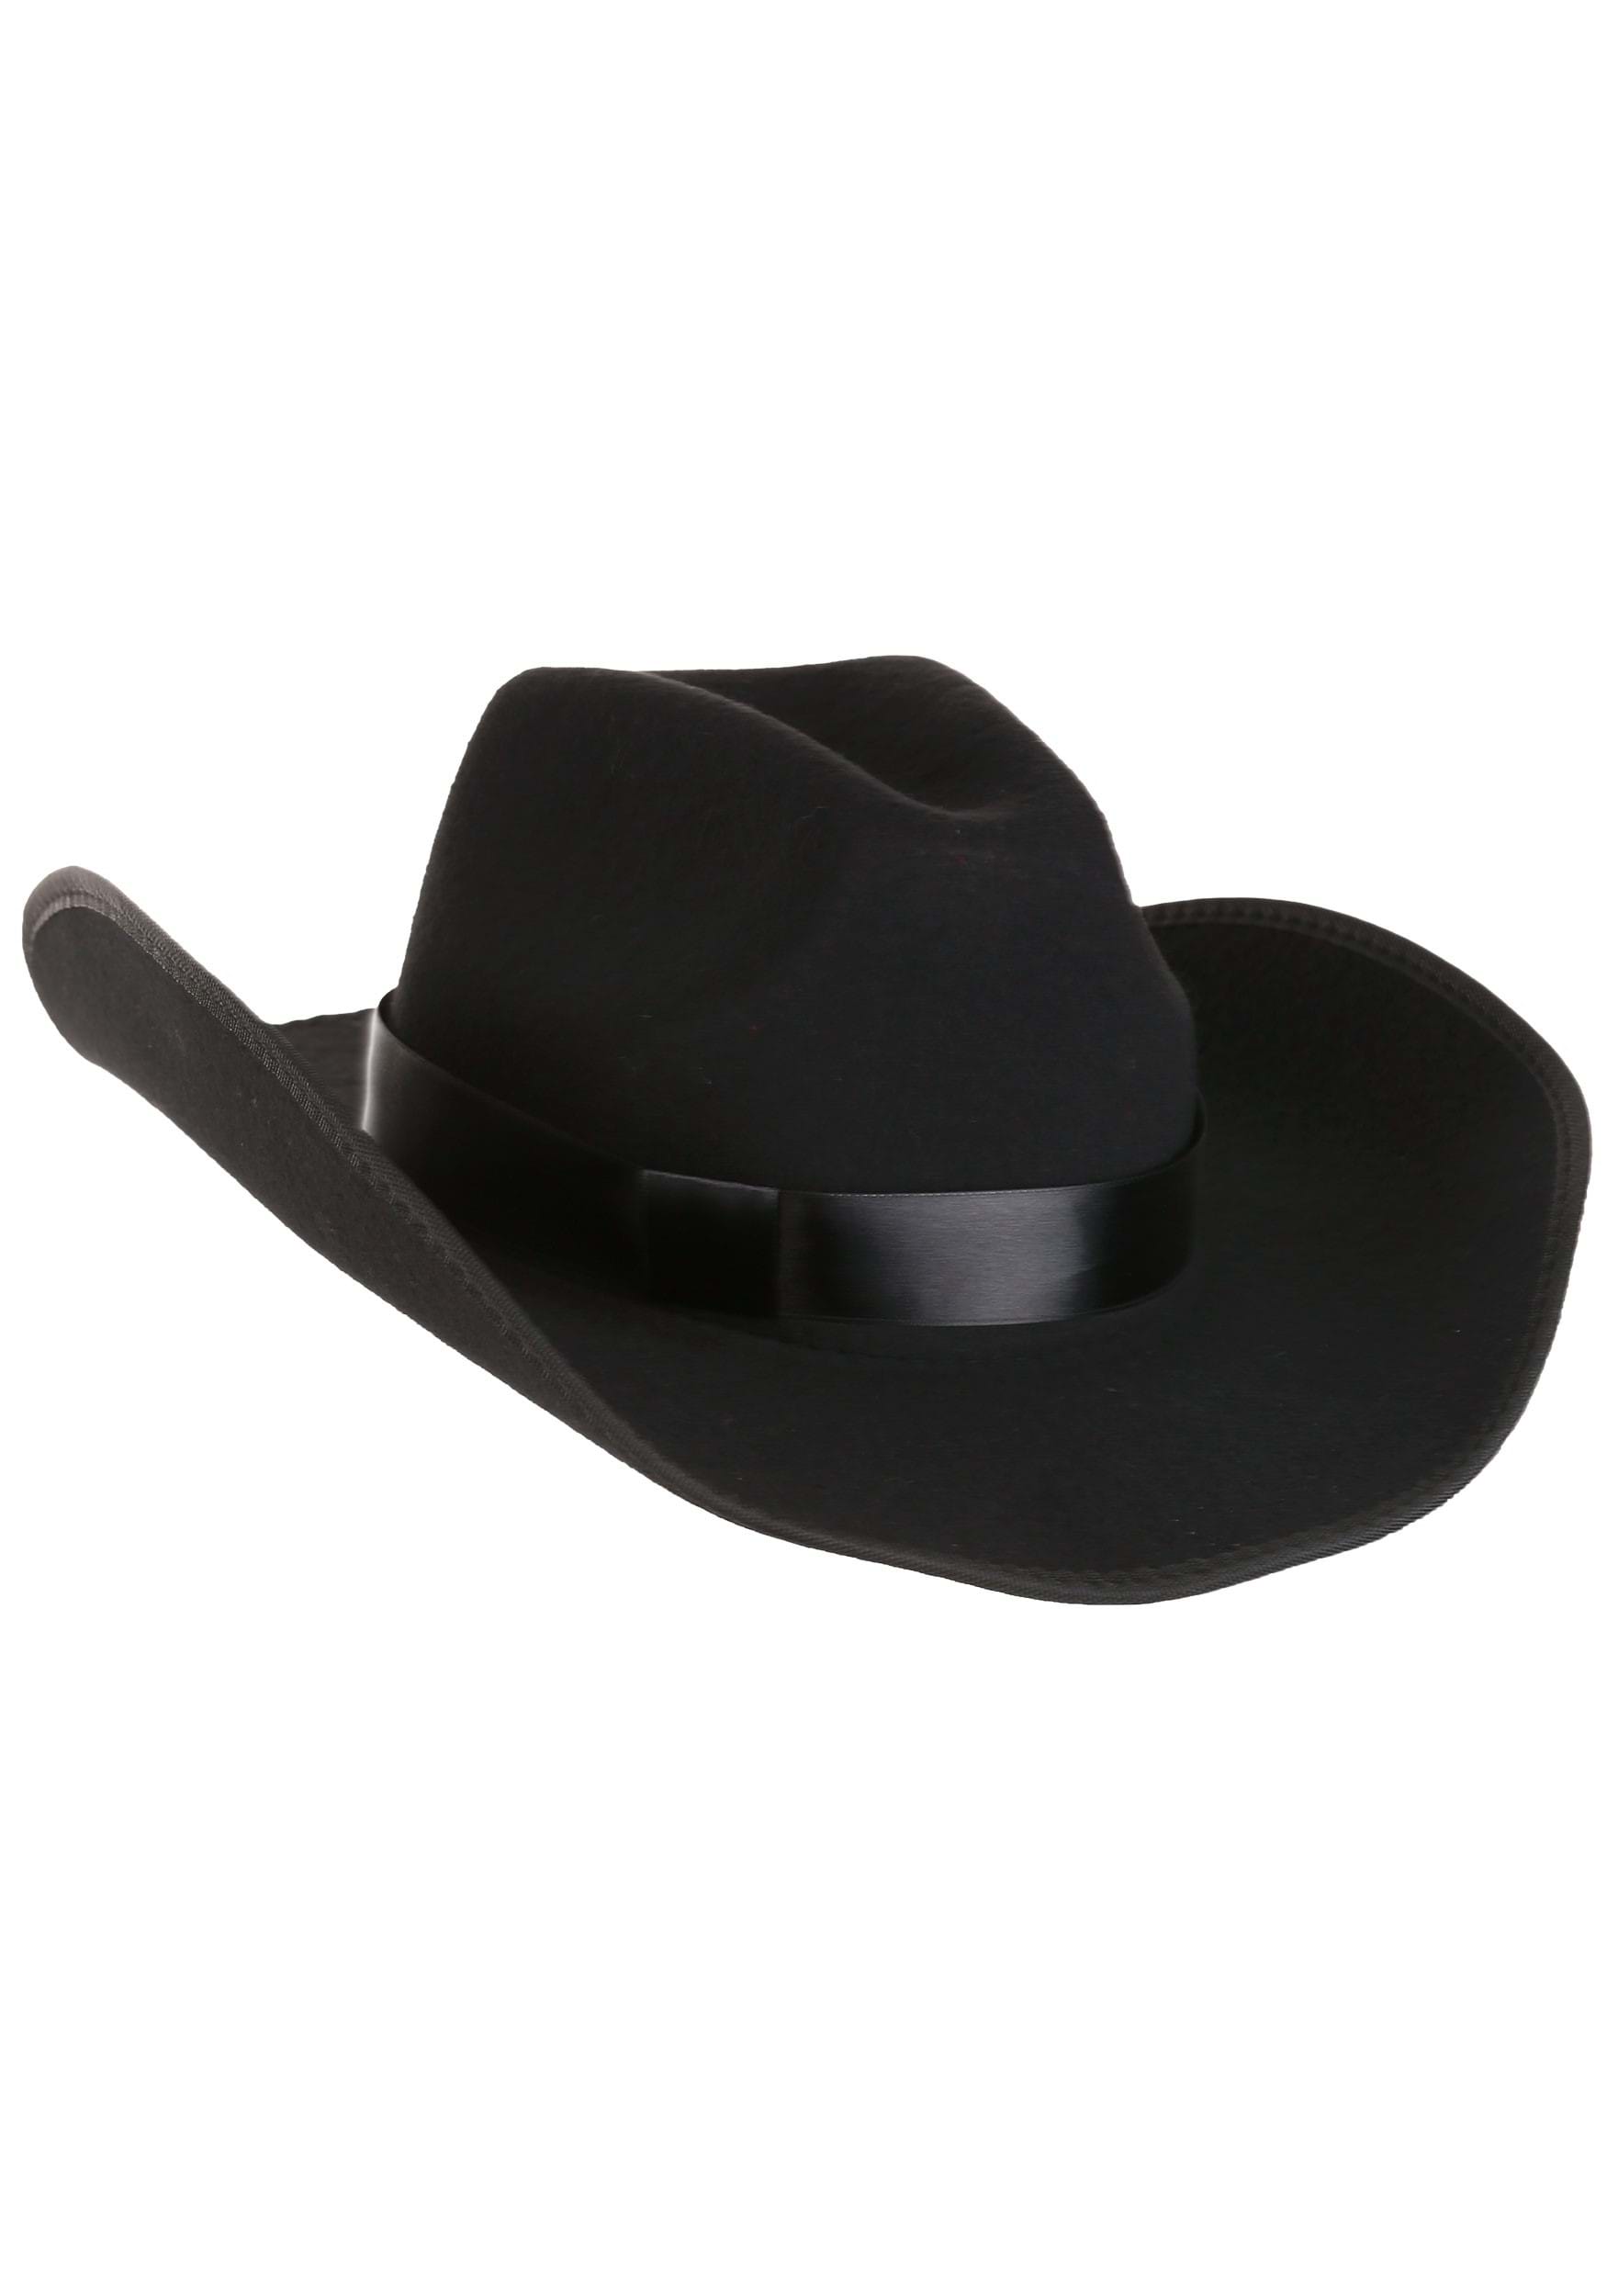 Western Cowboy Hat with Bull Head Pendant, Black/Silver, One Size, Wearable  Costume Accessory for Halloween